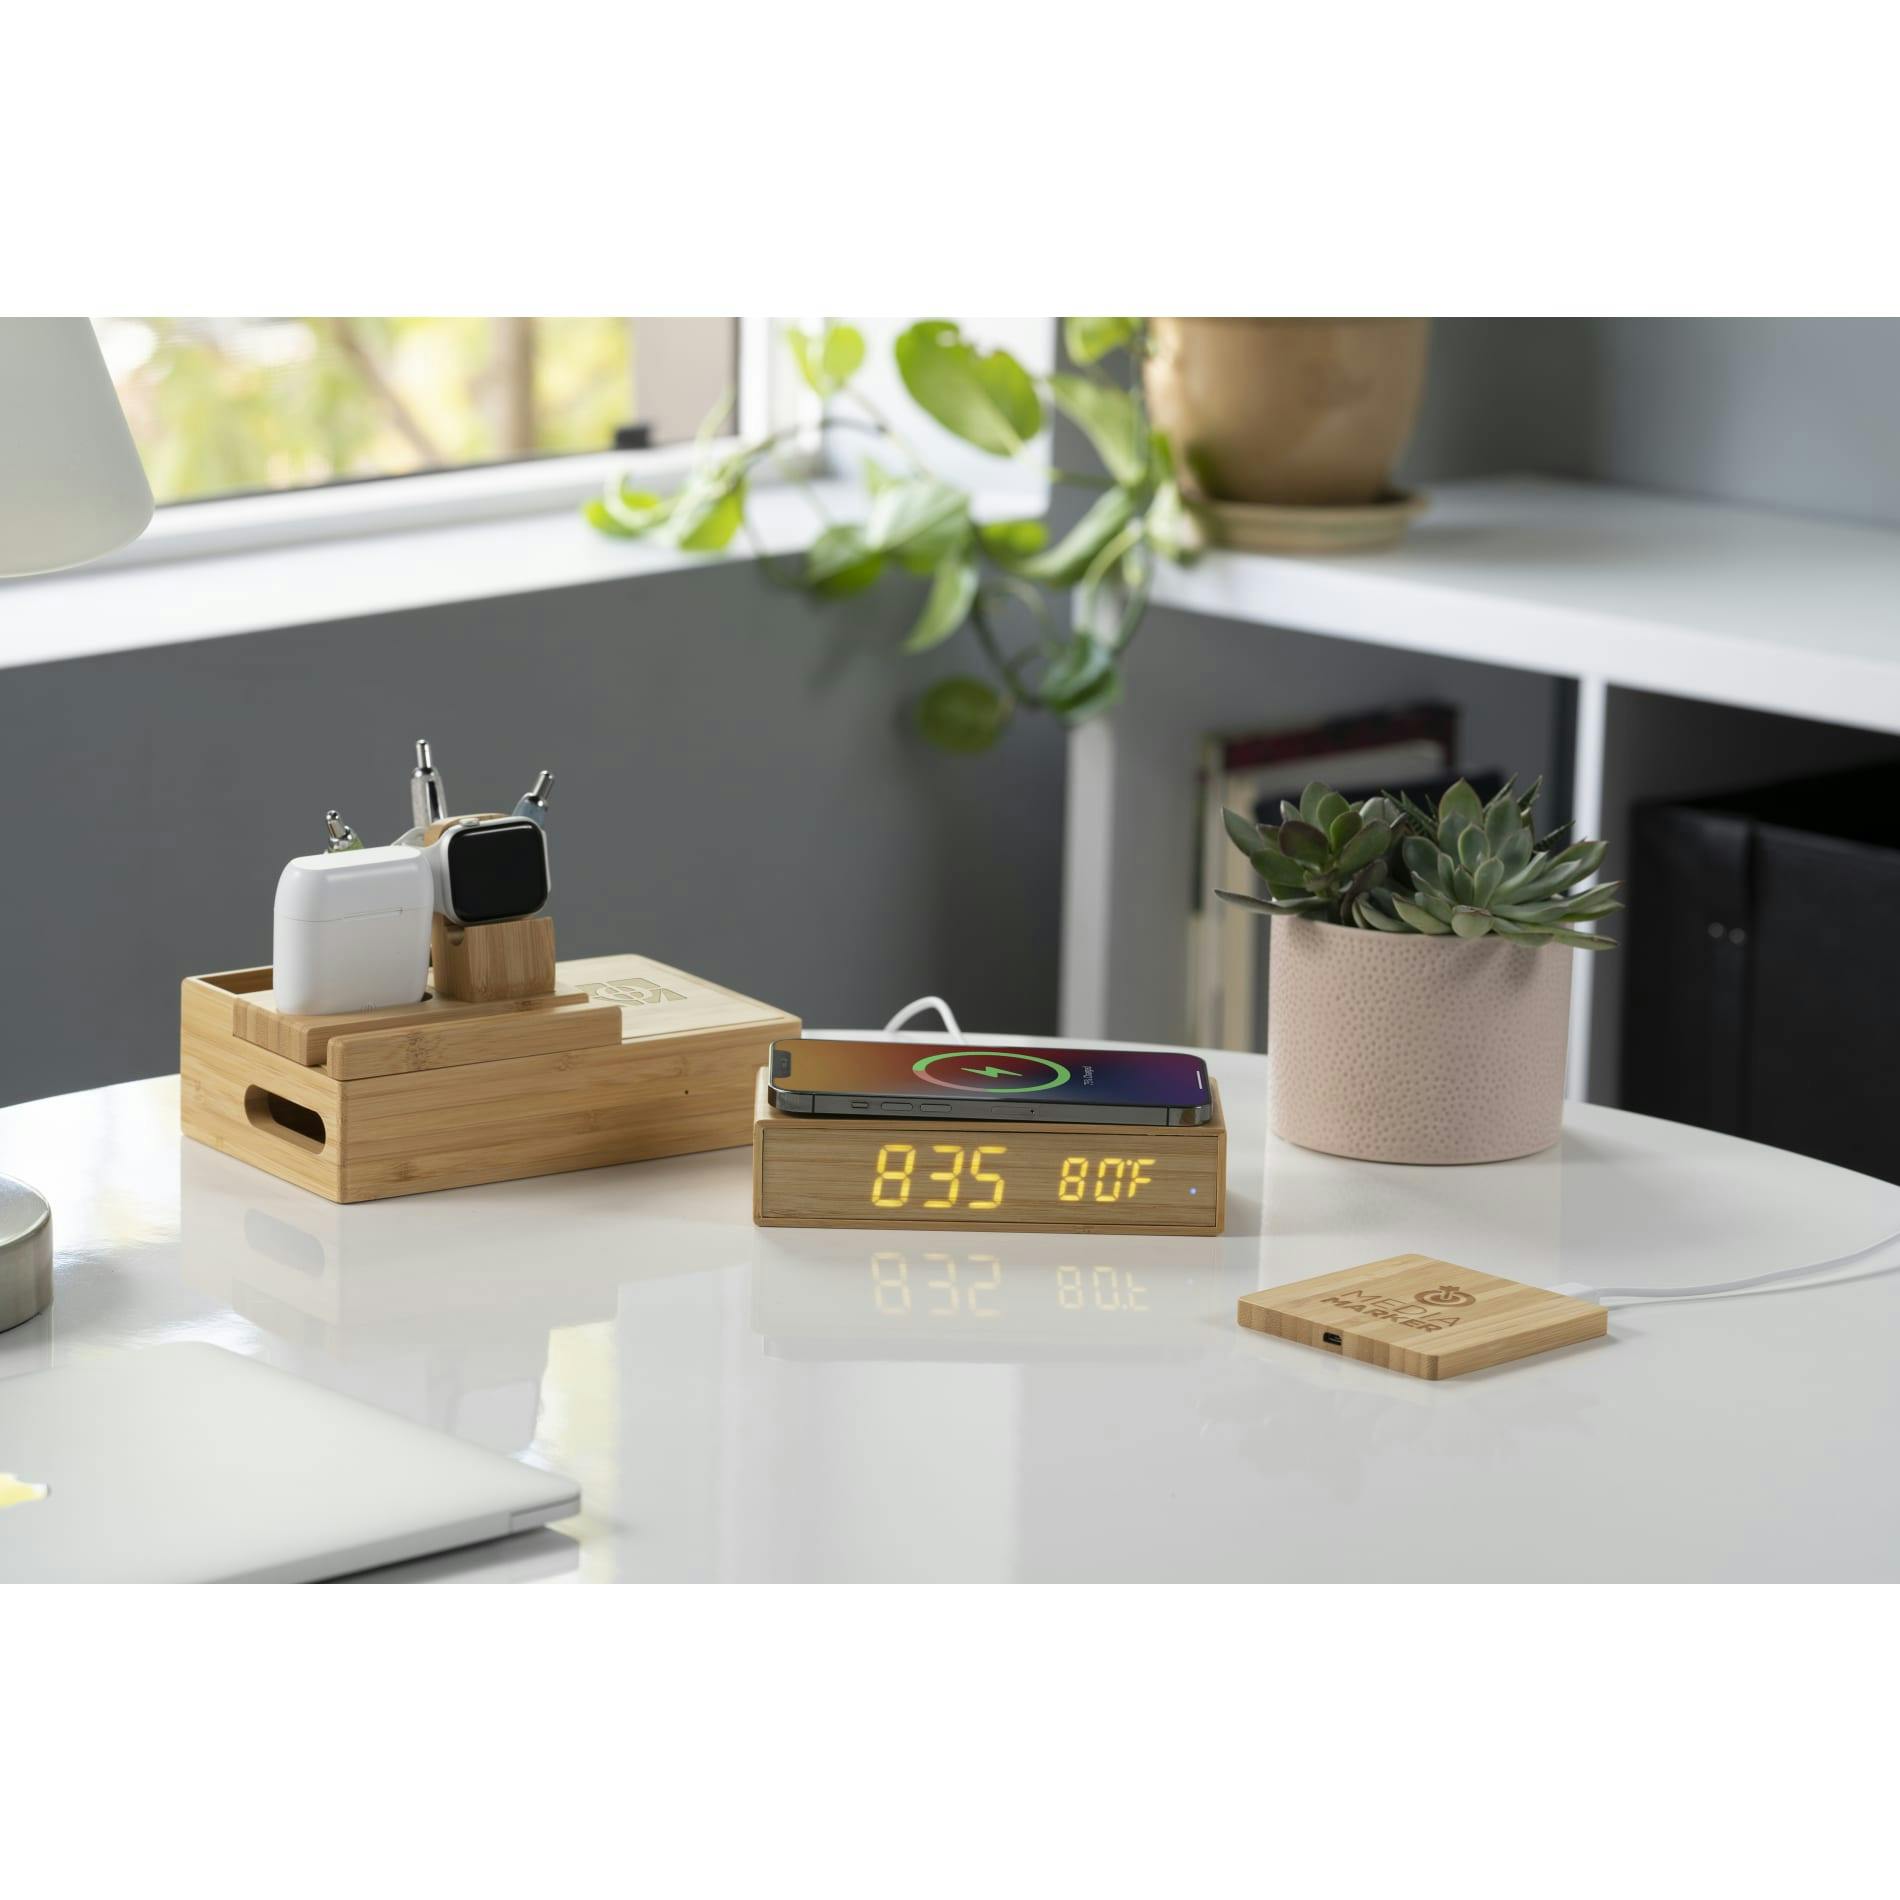 Bamboo Wireless Charging Pad with Dual Outputs - additional Image 1